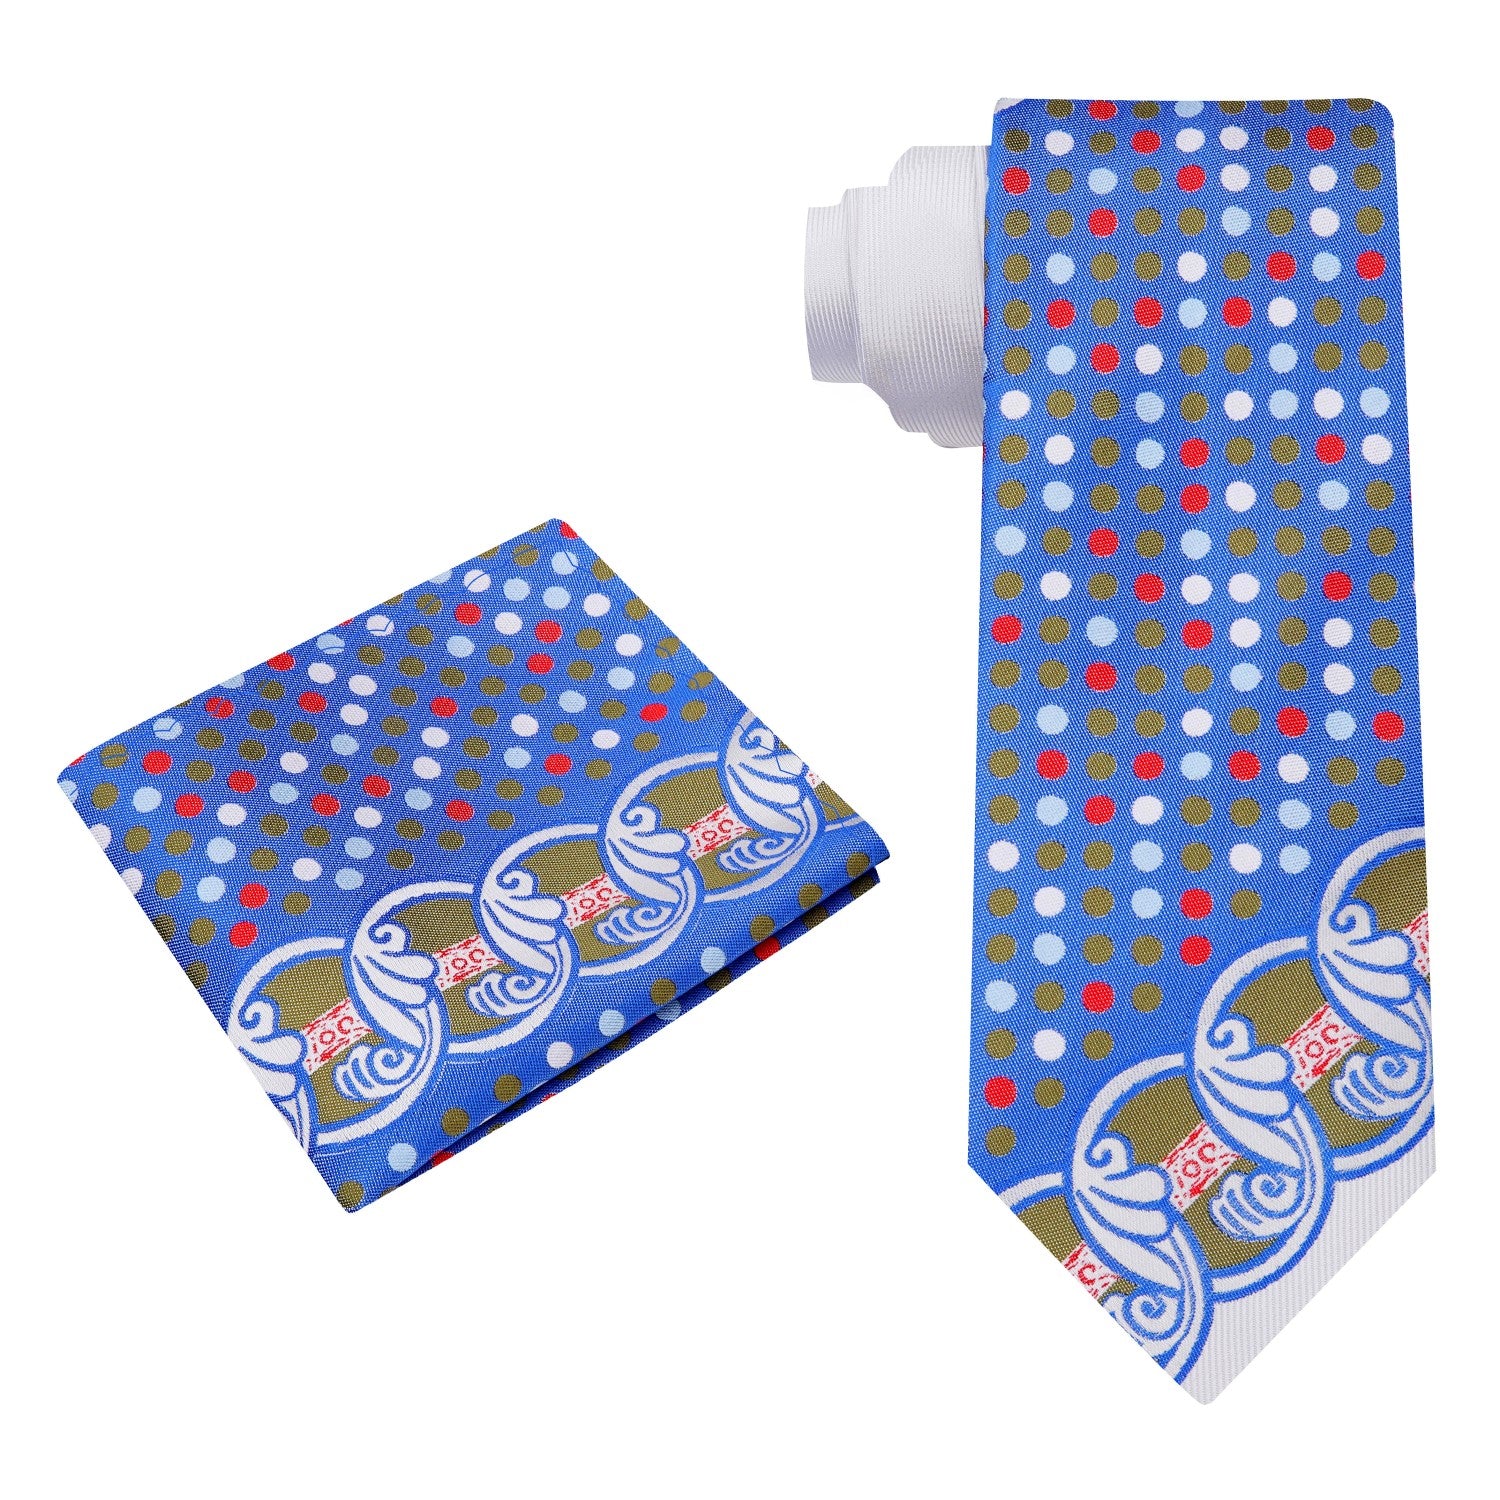 View 2: A White, Blue, Red, Green Wavy Circular Abstract with Dots Pattern Silk Necktie, With Matching Pocket Square